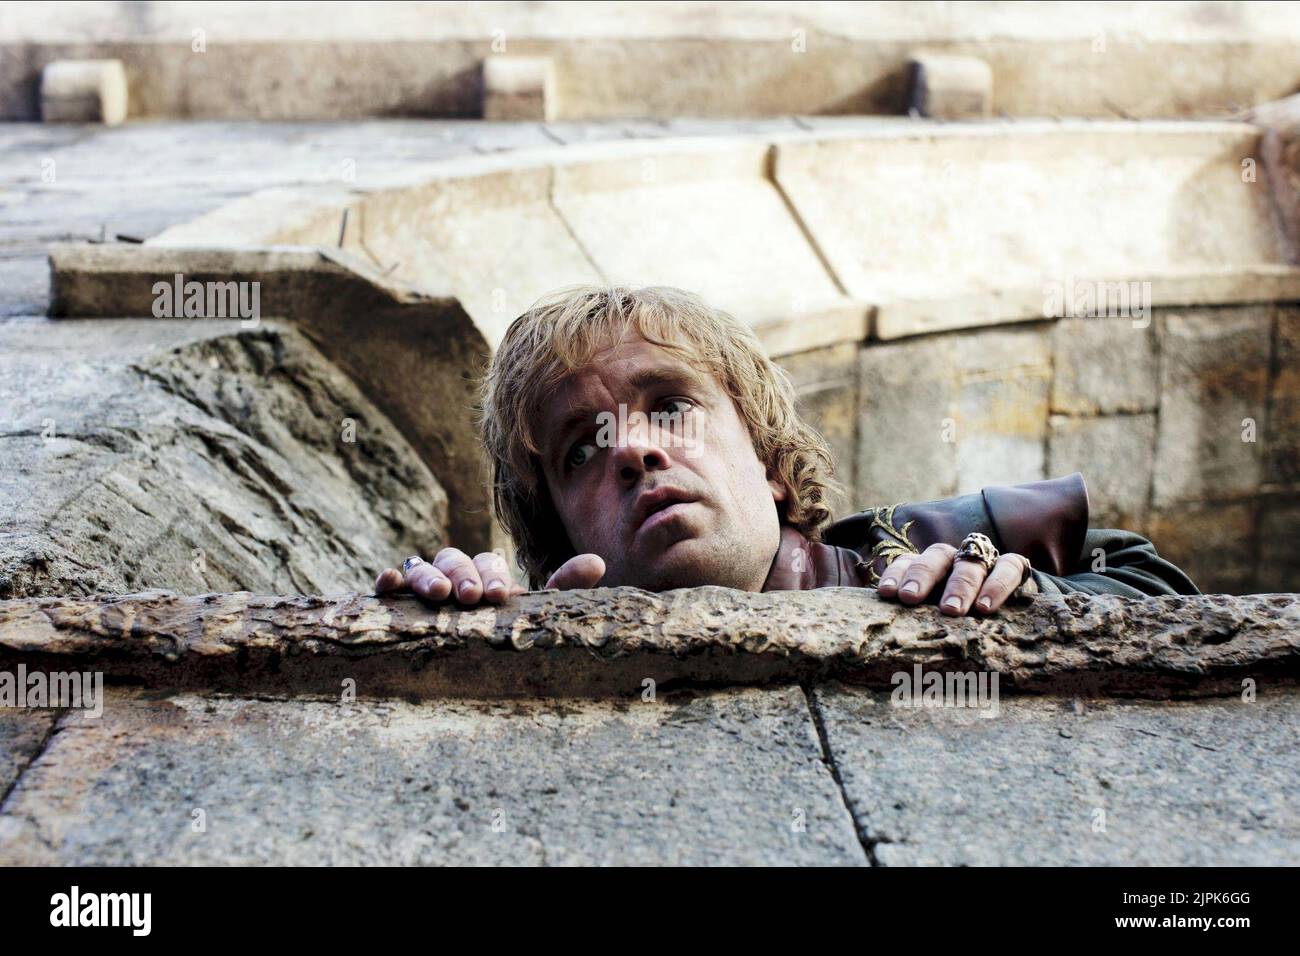 PETER DINKLAGE, GAME OF THRONES, 2011 Stock Photo